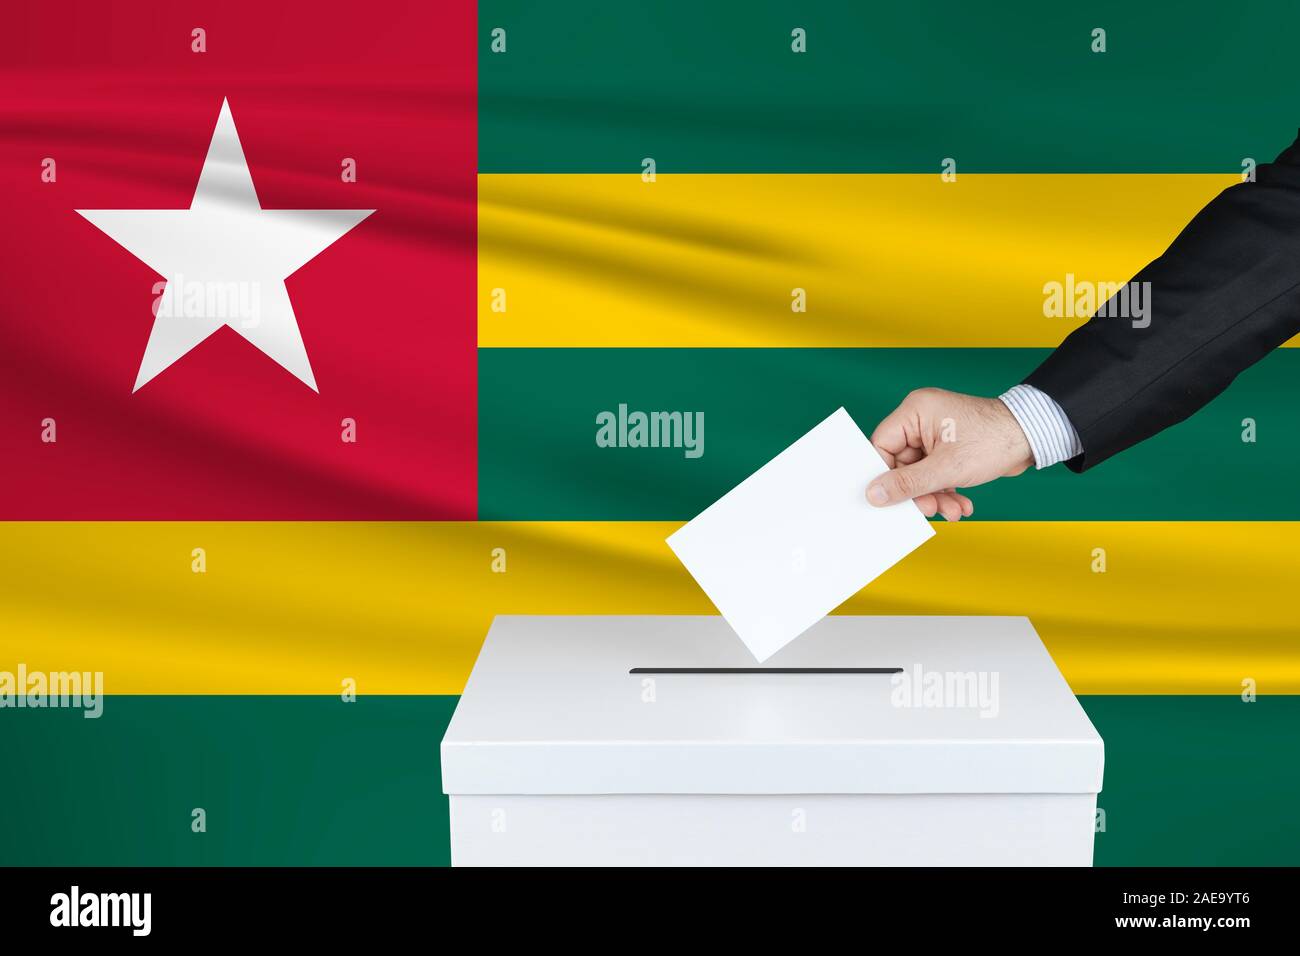 Election in Togo. The hand of man putting his vote in the ballot box. Waved Togo flag on background. Stock Photo